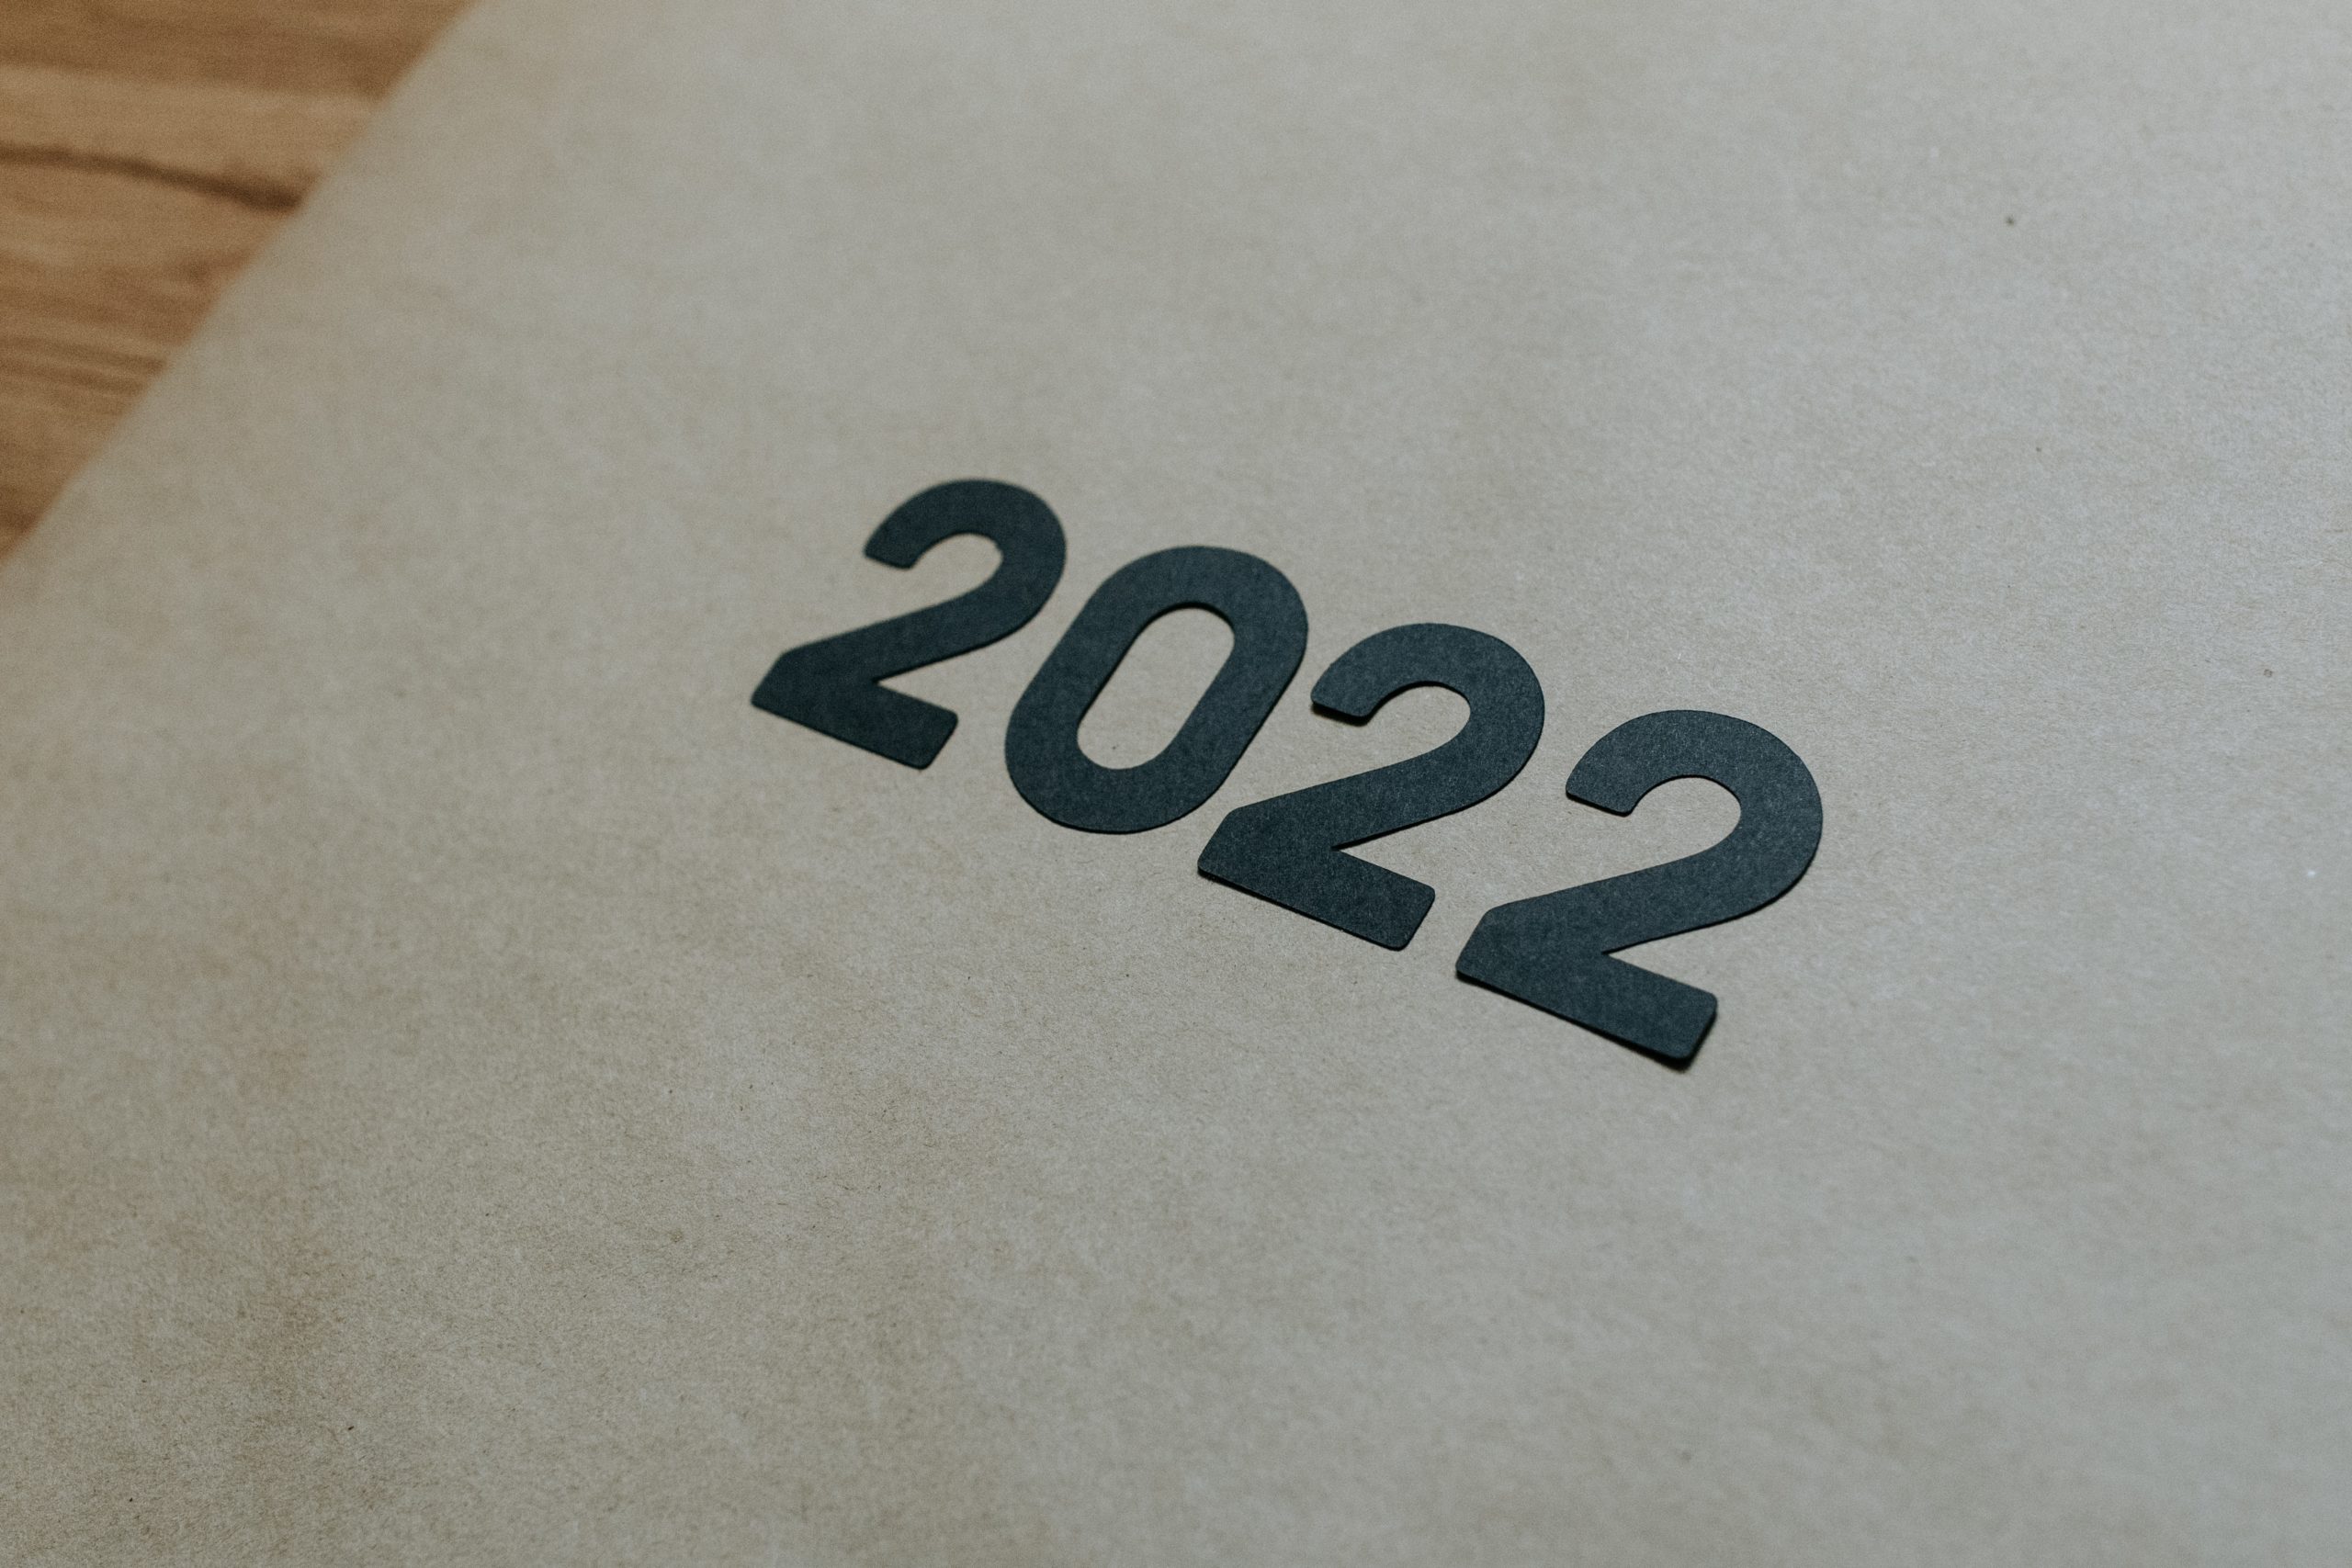 “2022” on paper